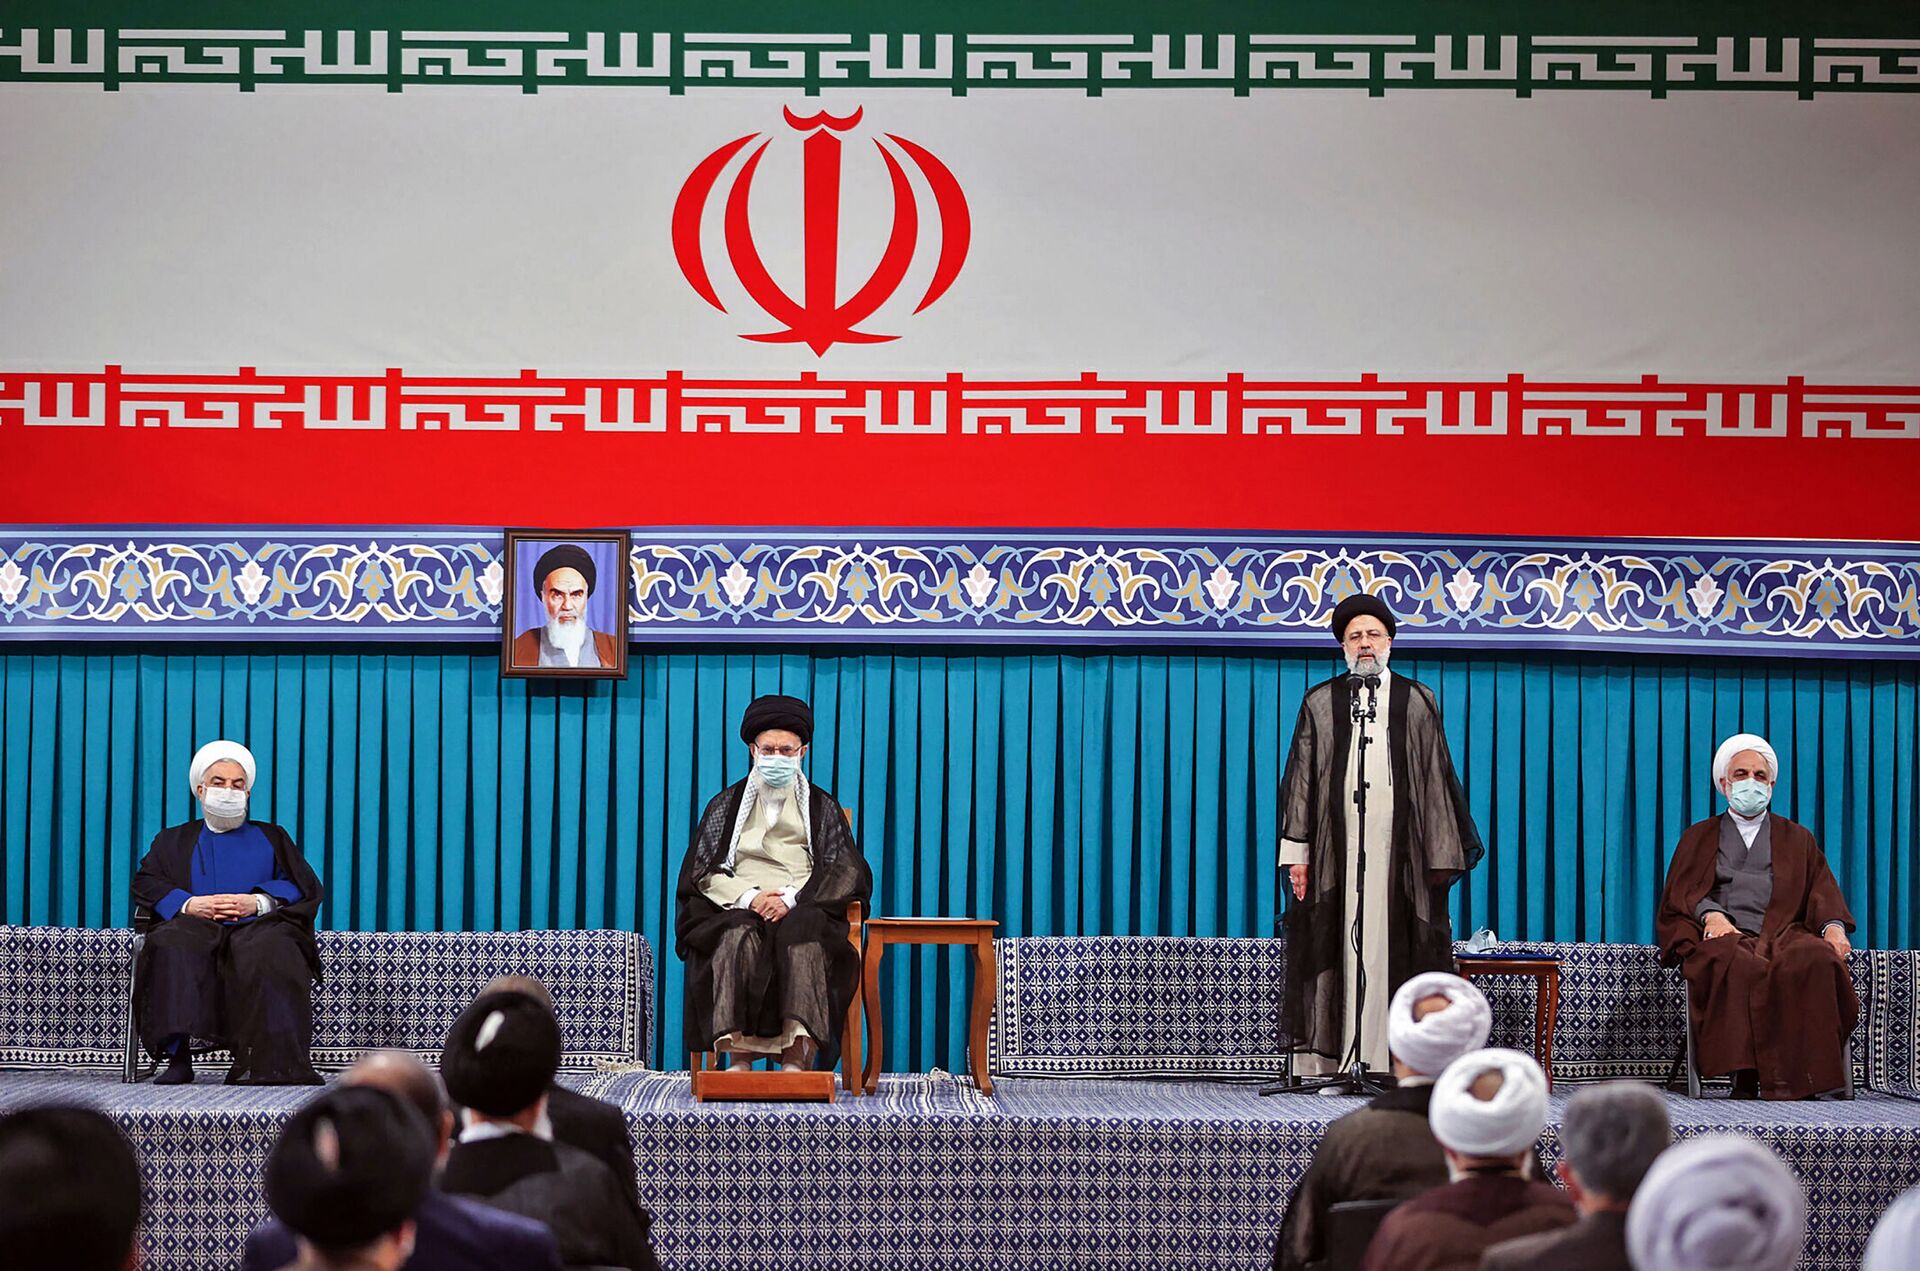 A handout picture provided by the office of Iran's Supreme Leader Ayatollah Ali Khamenei on August, 3 2021 shows him (C L) flanked by outgoing president Hassan Rouhani (L) during the inauguration ceremony for Ebrahim Raisi (C R) in the presence of the head of judiciary authority Gholamhossein Mohseni-Ejei (R) in Khamenei's office in the capital Tehran. - Sputnik International, 1920, 13.09.2021